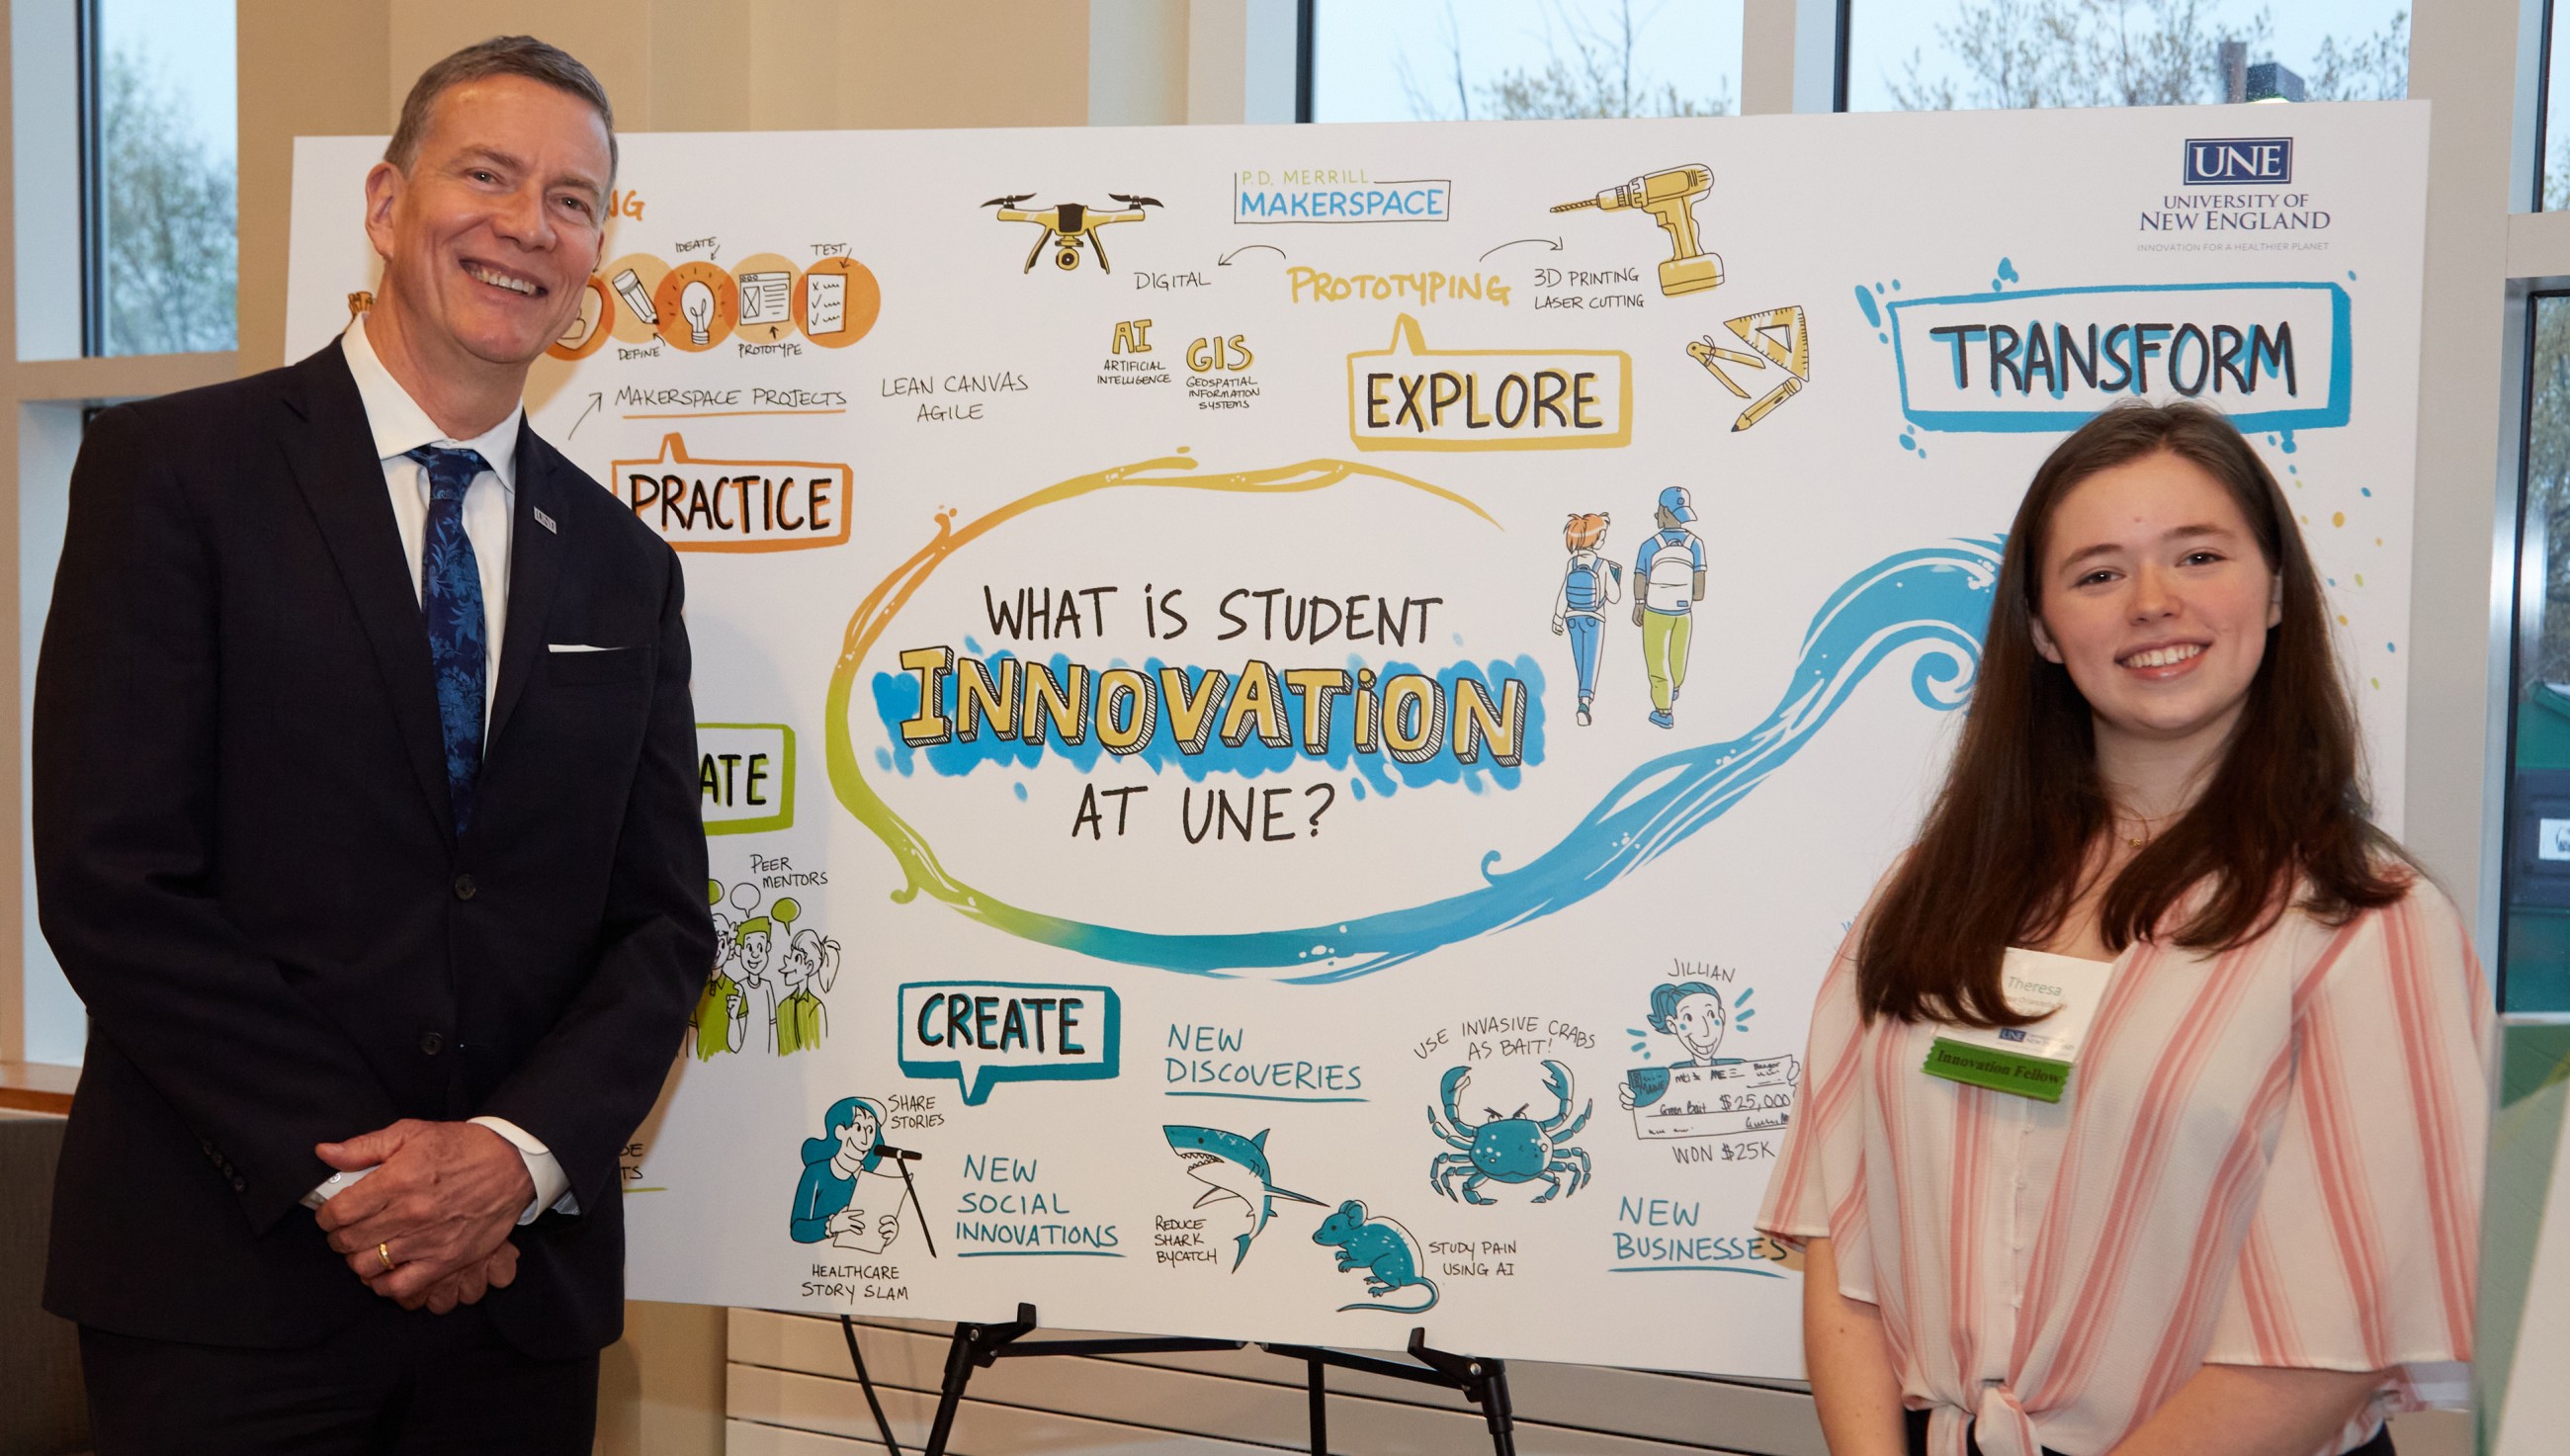 U N E president James Herbert stands with a student in front of a poster depicting innovation at U N E